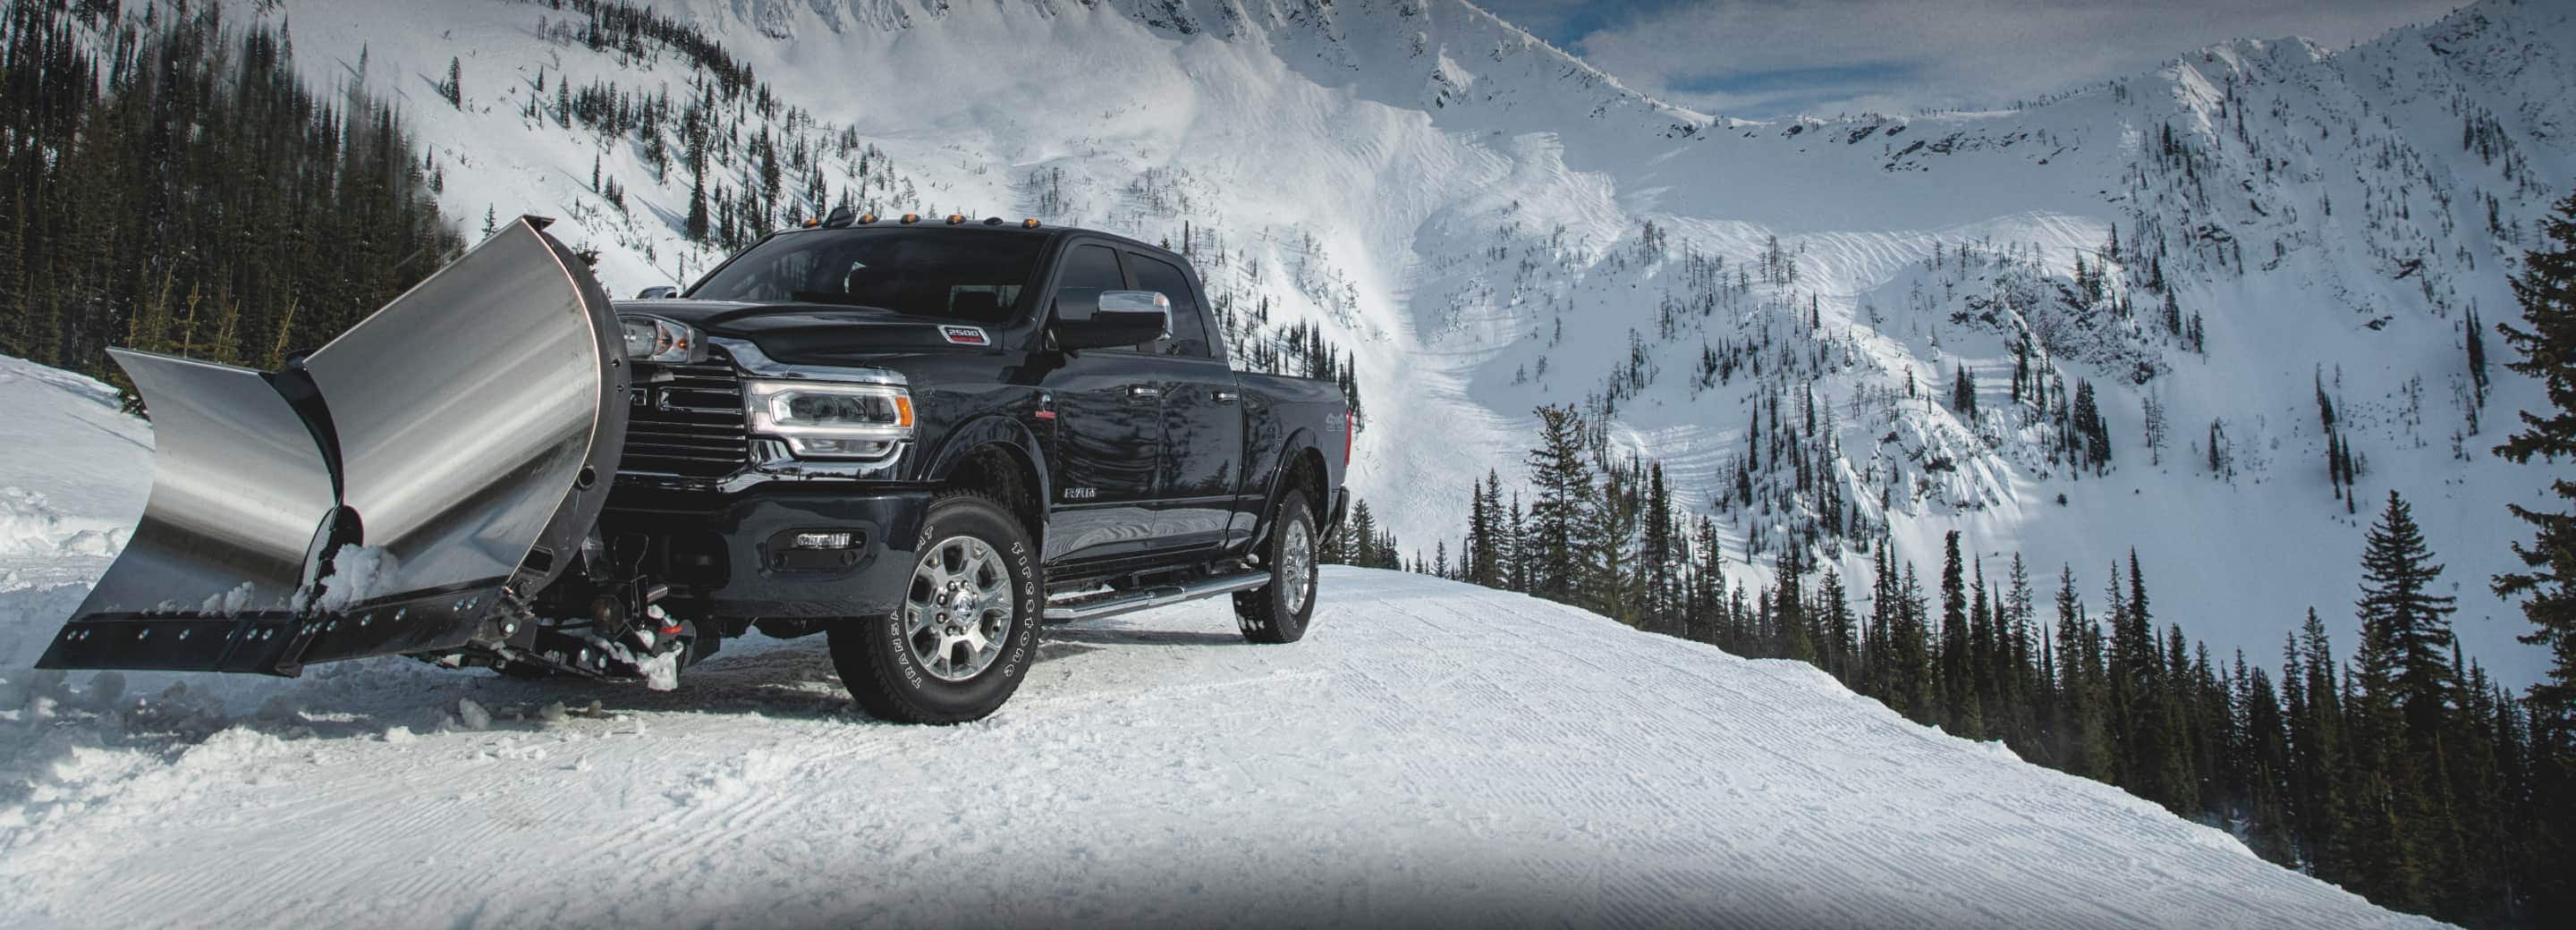 A 2022 Ram 2500 Laramie 4x4 with a stainless steel v-plow, clearing away snow on a hilltop in the mountains.